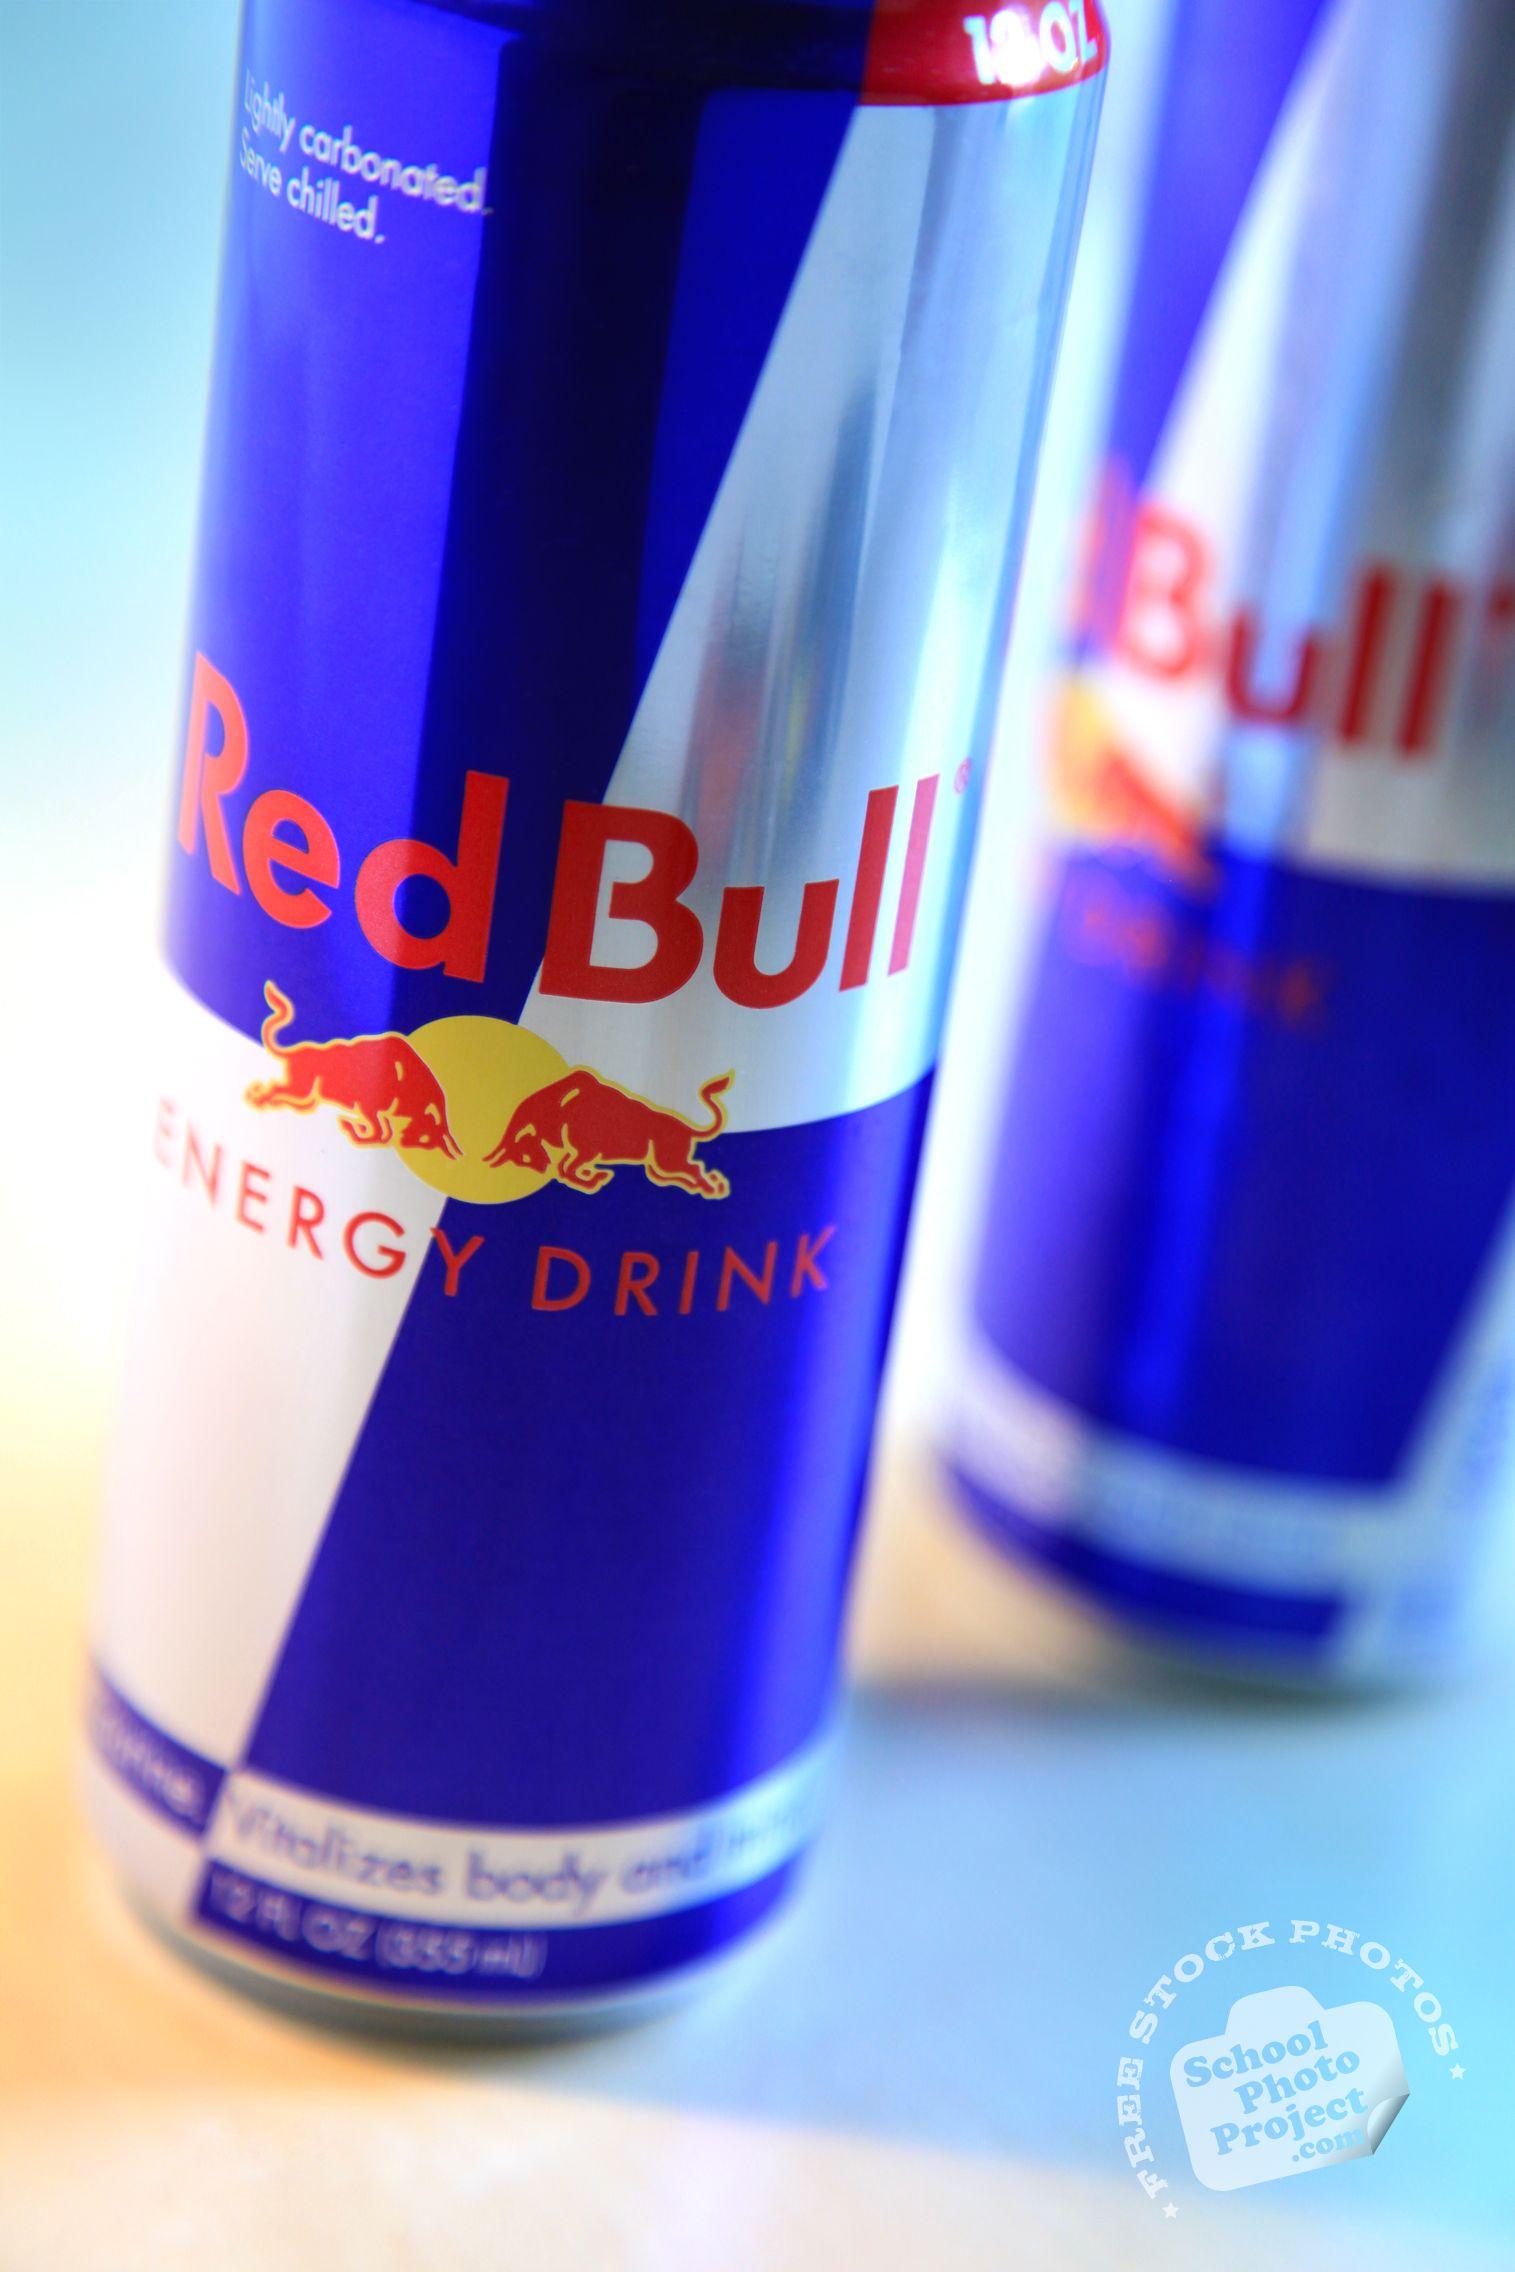 Famous Bull Logo - Red Bull Logo, FREE , Image, Picture: Red Bull's Cans